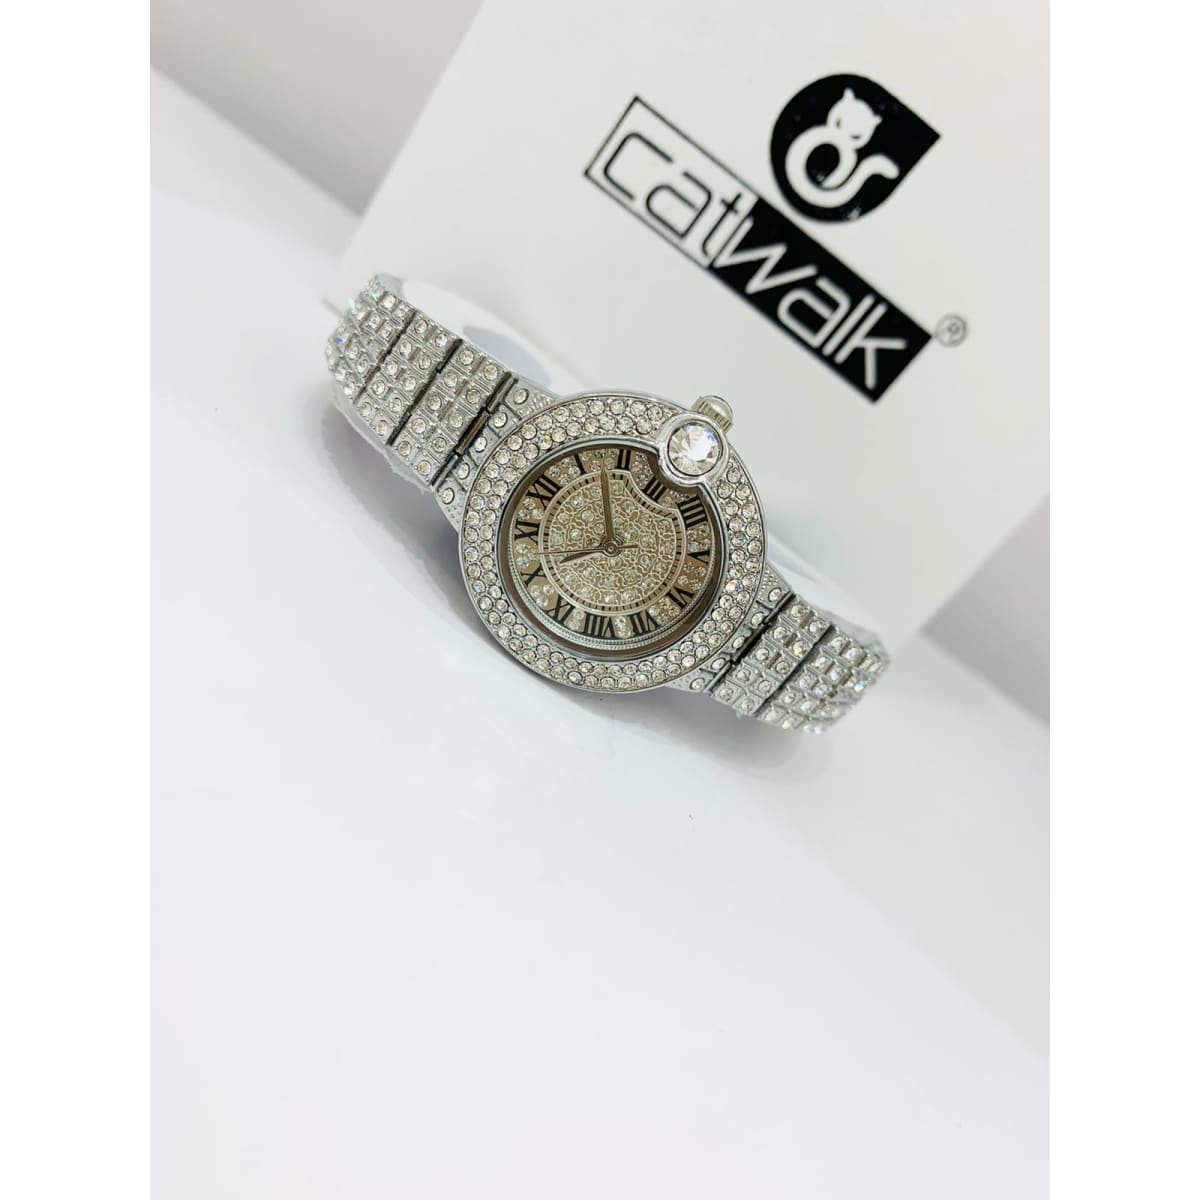 Catwalk CW2022/5 Fashionable Cz Stone Covered Analog Stainless Watch for Women with Gift Box Shop